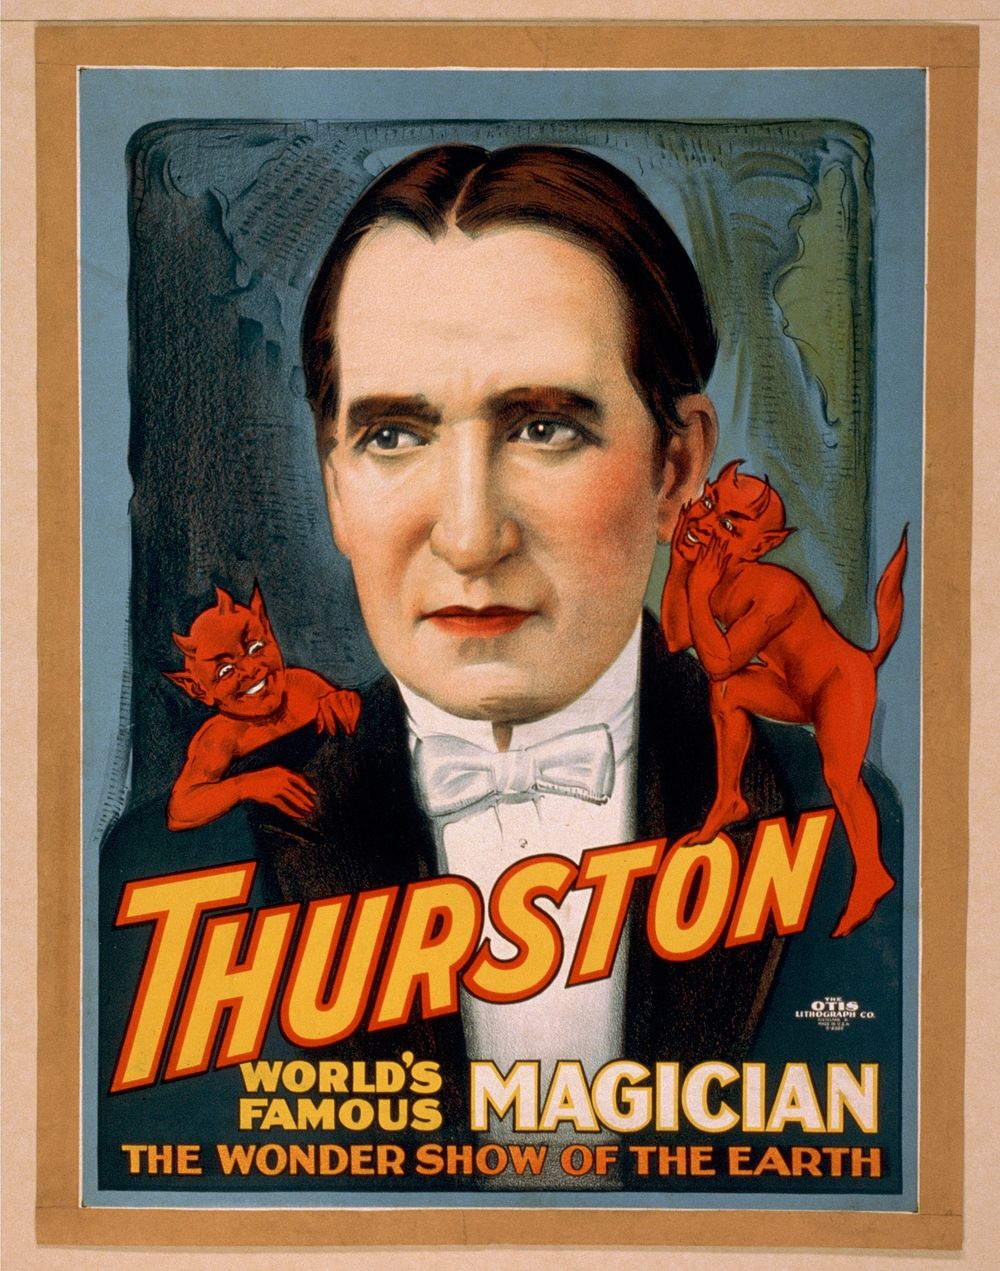 Thurston, world's famous magician the wonder show of the earth.